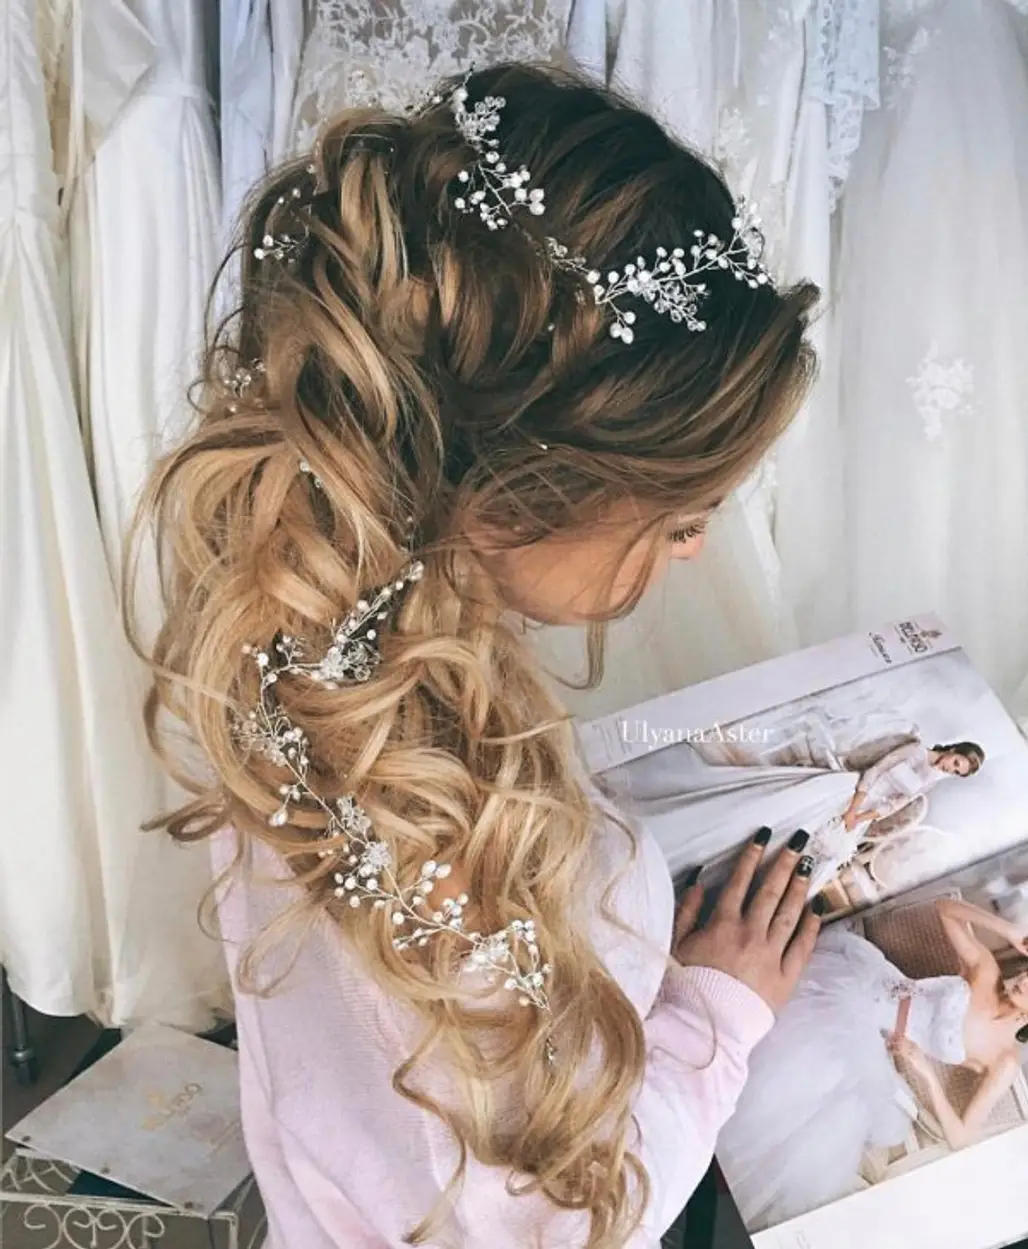 hair, clothing, bridal accessory, hairstyle, fashion accessory,